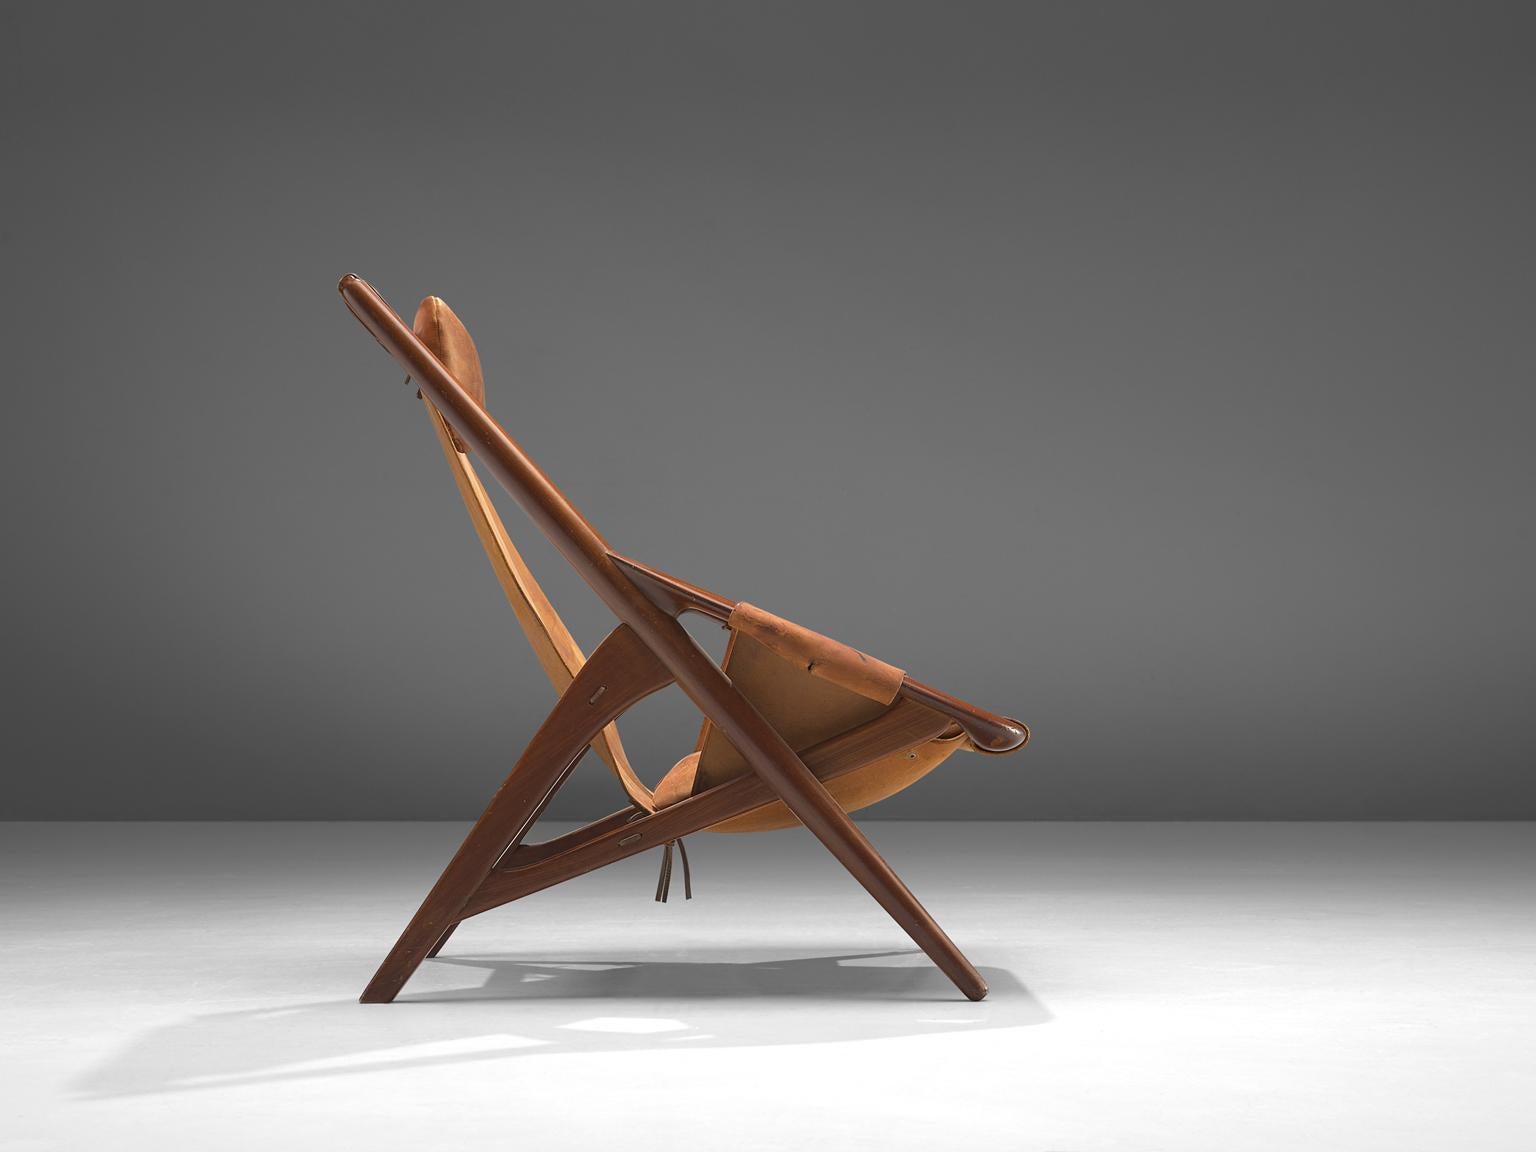 W. Andersag, lounge chair, teak and saddle leather, Italy, 1960s.

This chair is very dynamic due it's design and shapes. The teak frame shows beautiful lines. The frame and construction reminds of the sturdy hunting chairs. Thick saddle leather